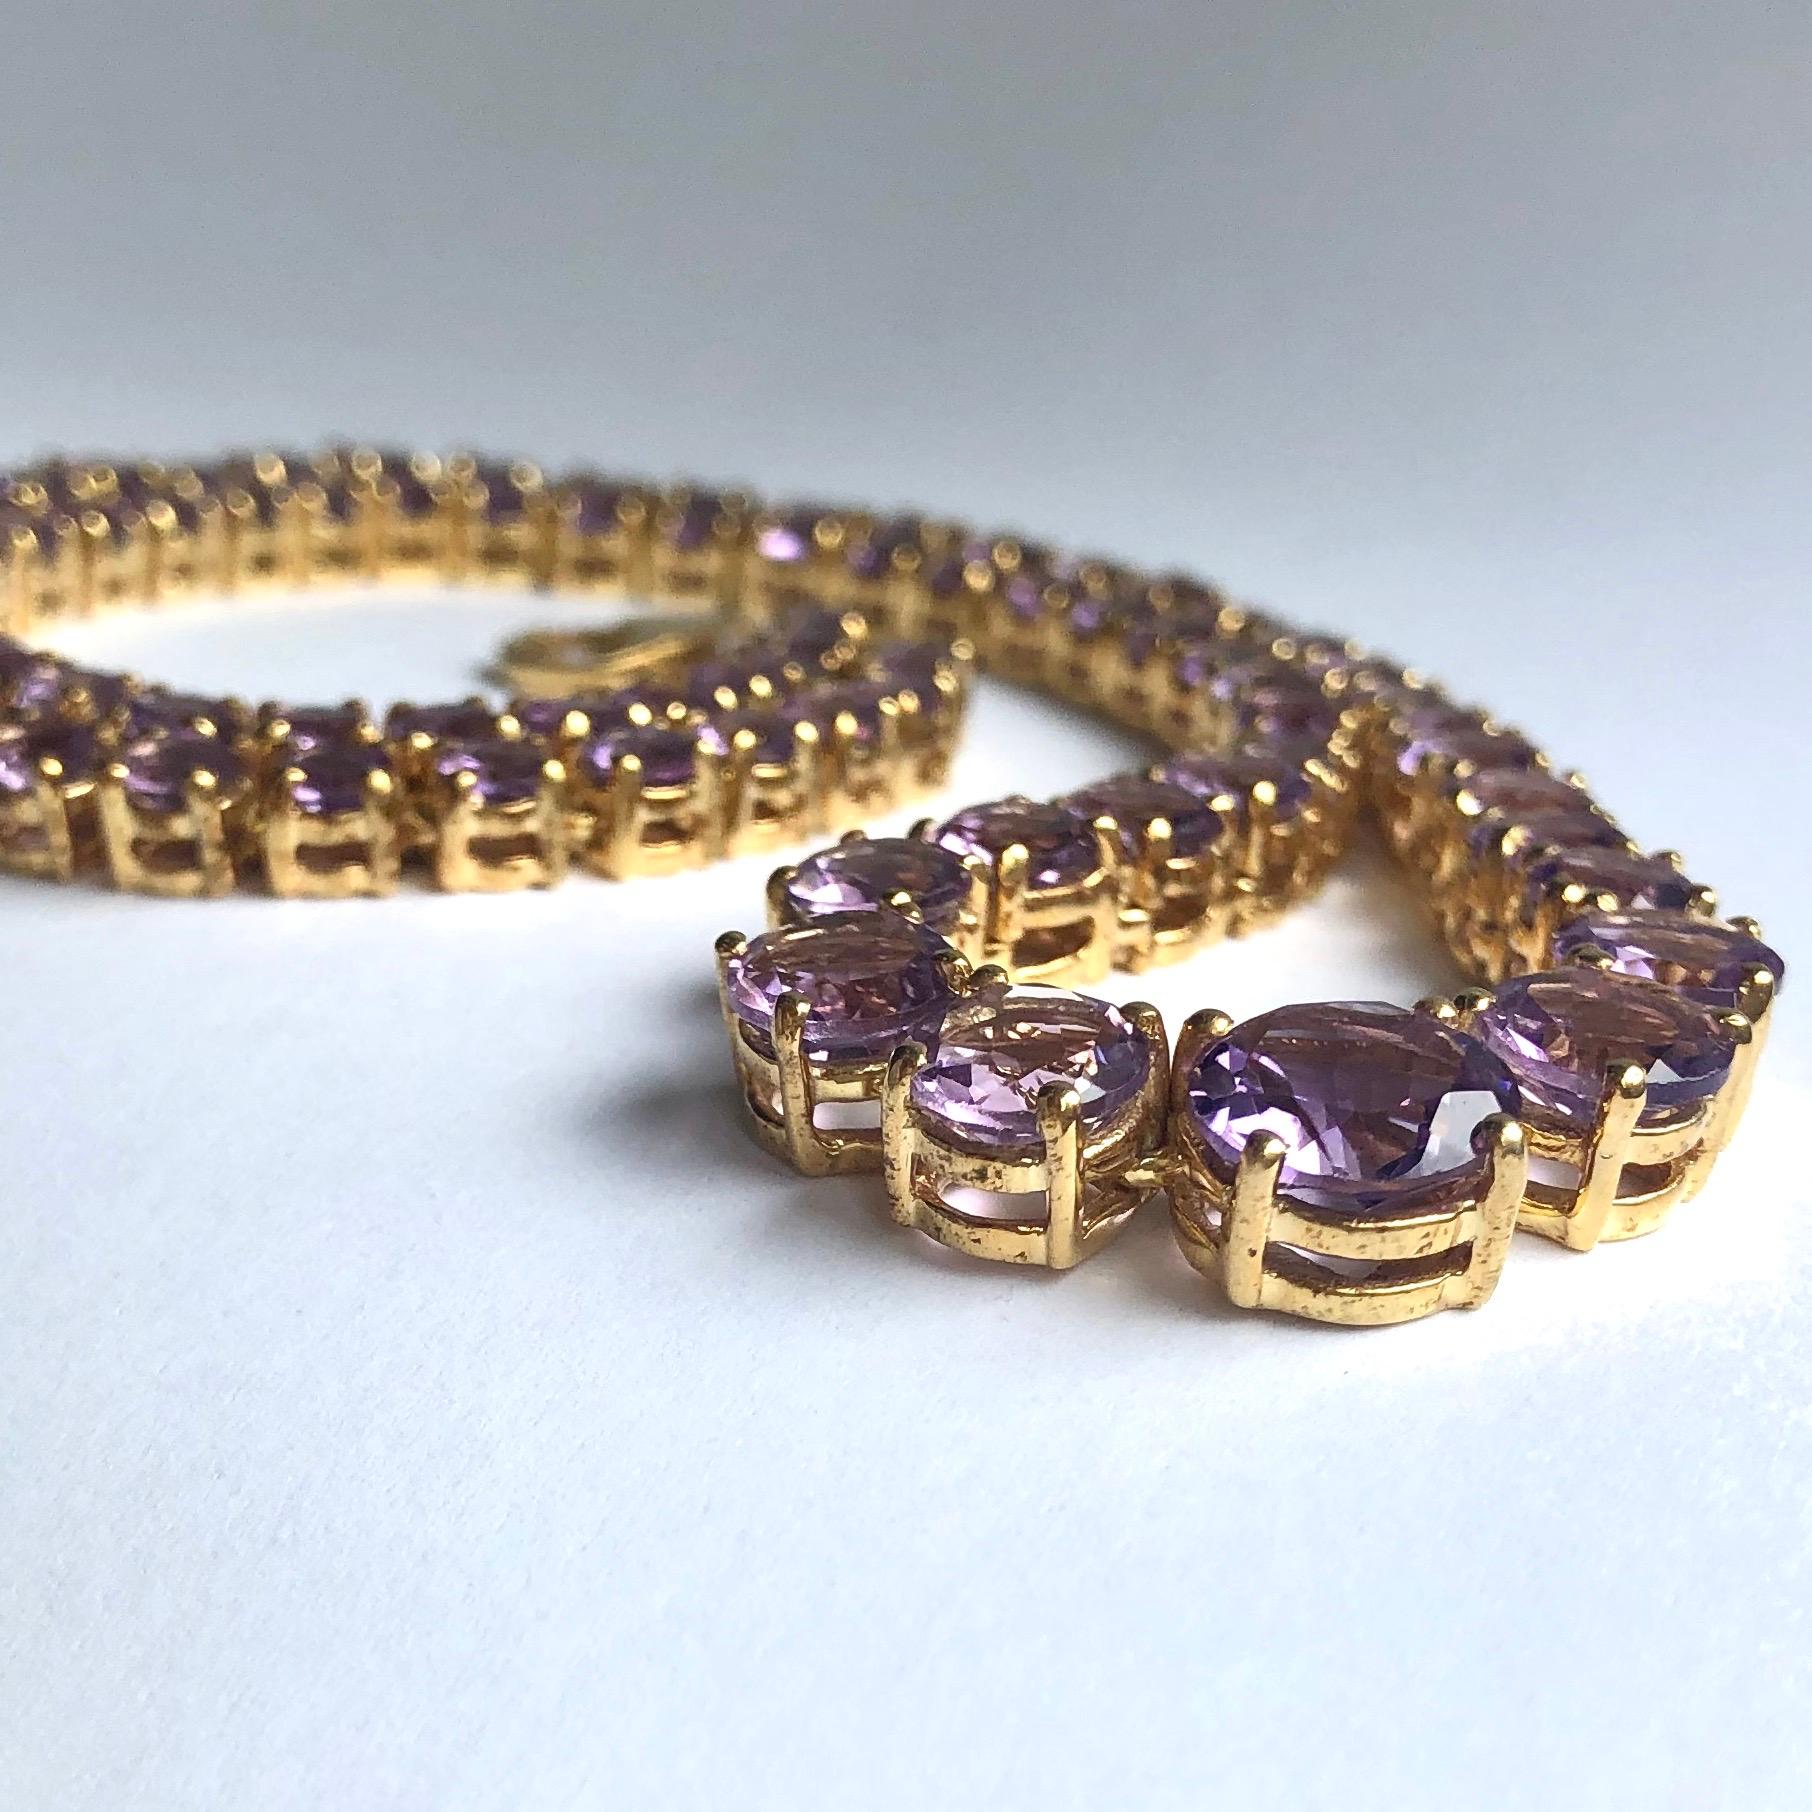 The amethyst stones in this necklace are the most stunning lilac colour and slightly graduate in size starting with the largest at the centre, getting bigger towards the clasp. The largest stone measures 9mm in diameter and the smallest 3mm. The